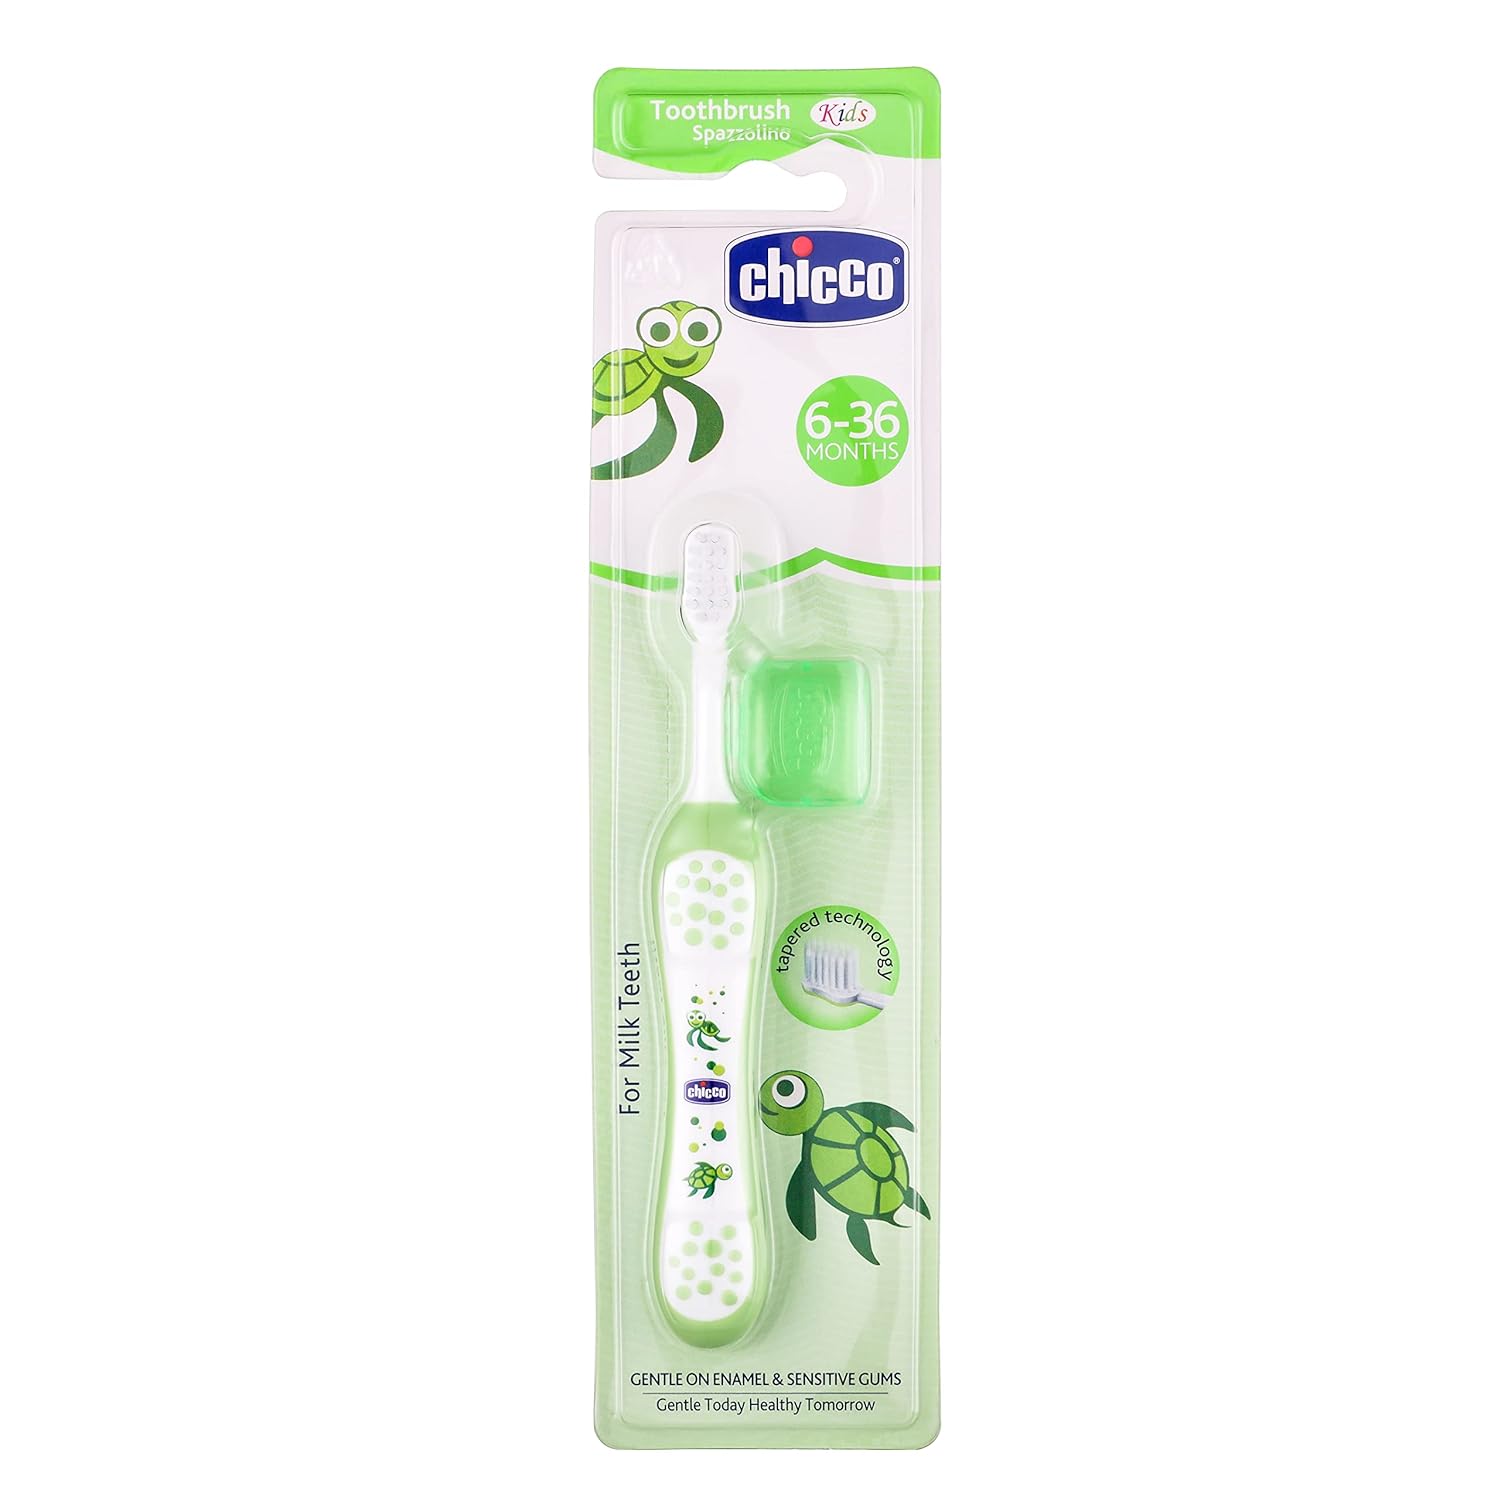 Chicco Toothbrush Green 6M-36M, infant, manual,